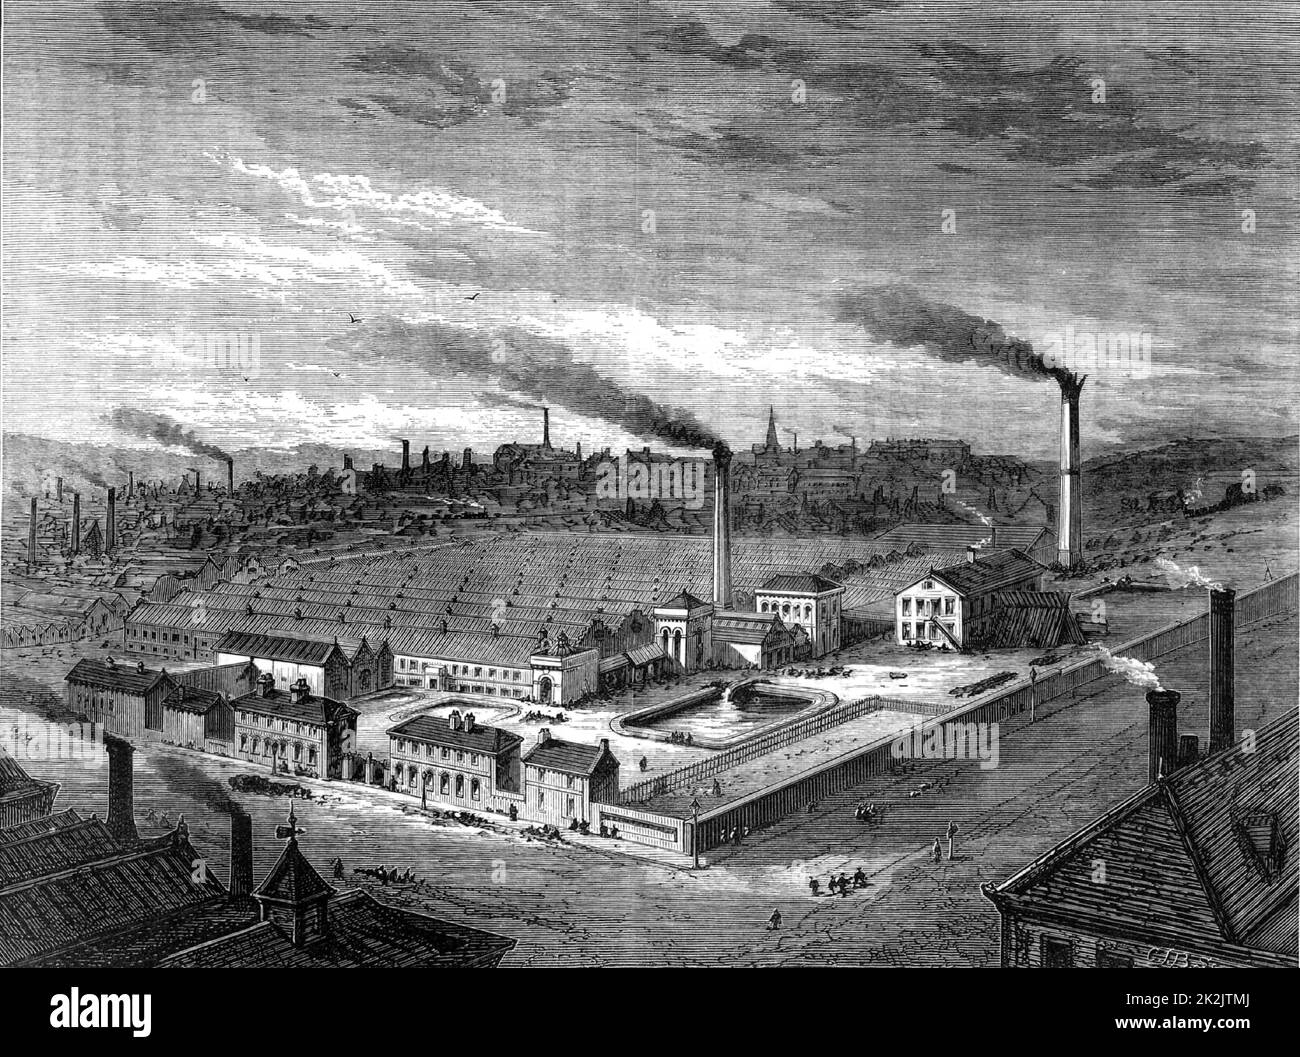 Isaac Holden & Sons' Alston Wool Coming Works, Bradford, Yorkshire, England, c1880. Aus „Great Industries of Great Britain“ (London, c1880). Gravur. I Stockfoto